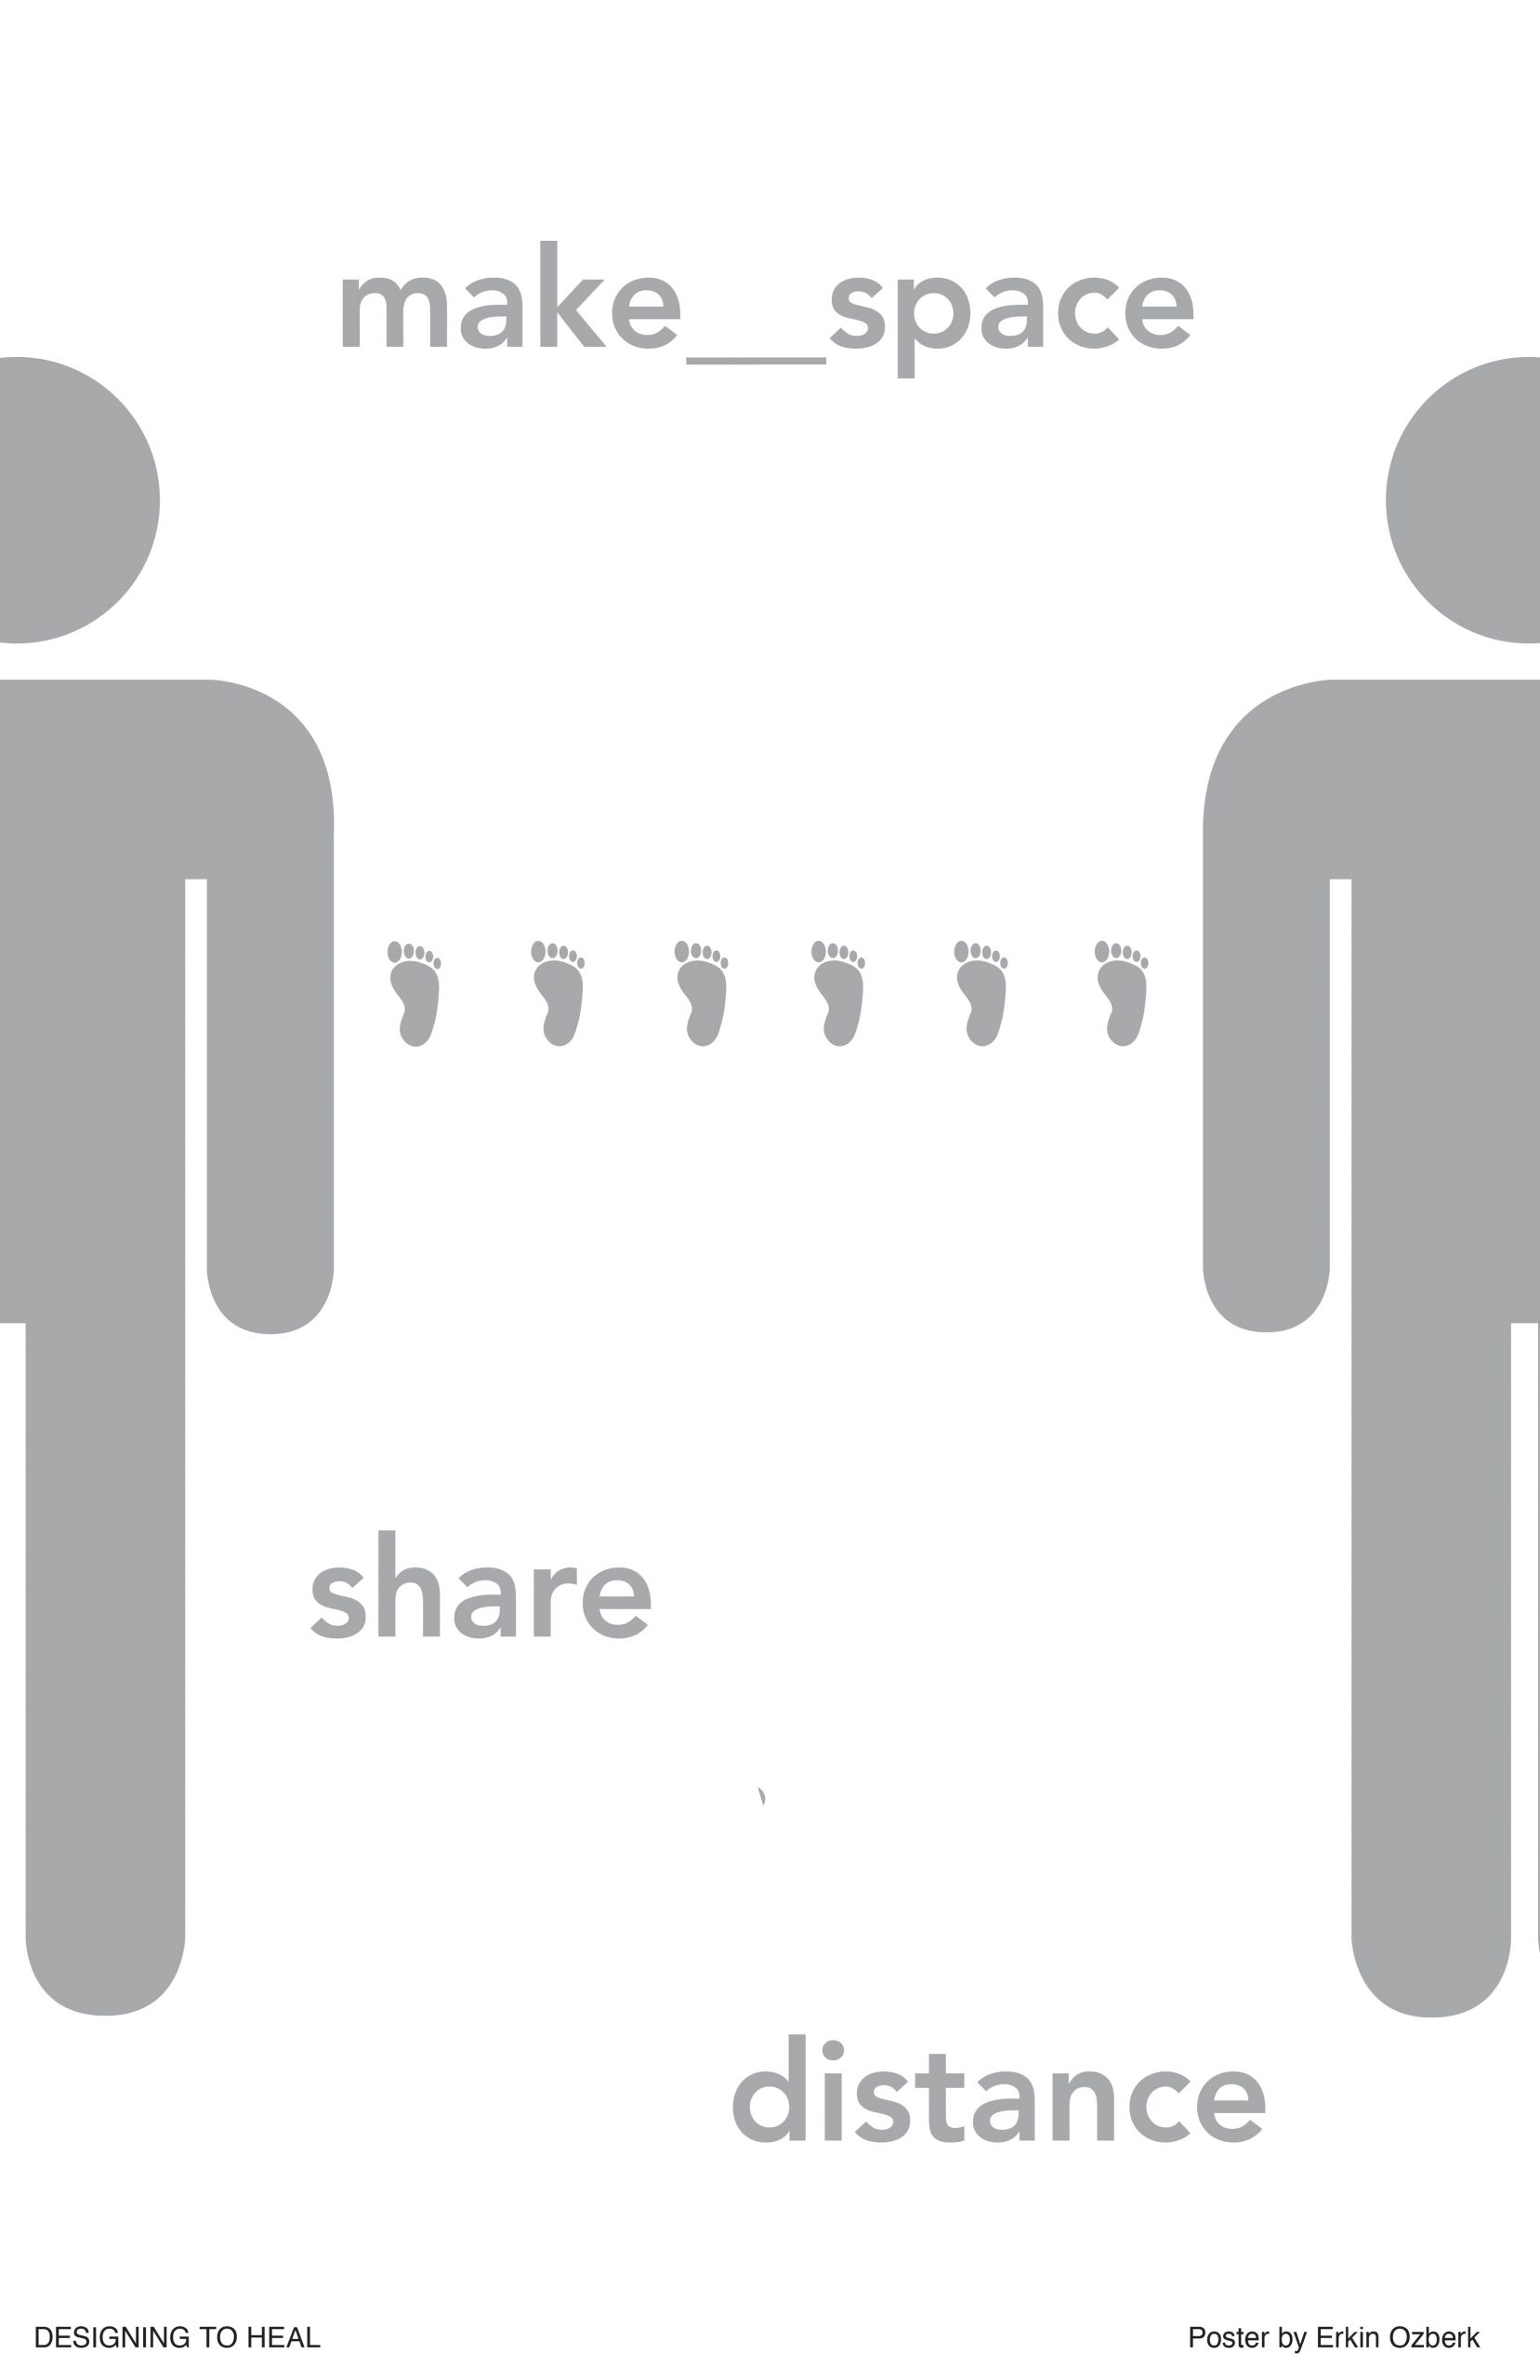 type-based poster with the text make space share distance and bathroom figures for people